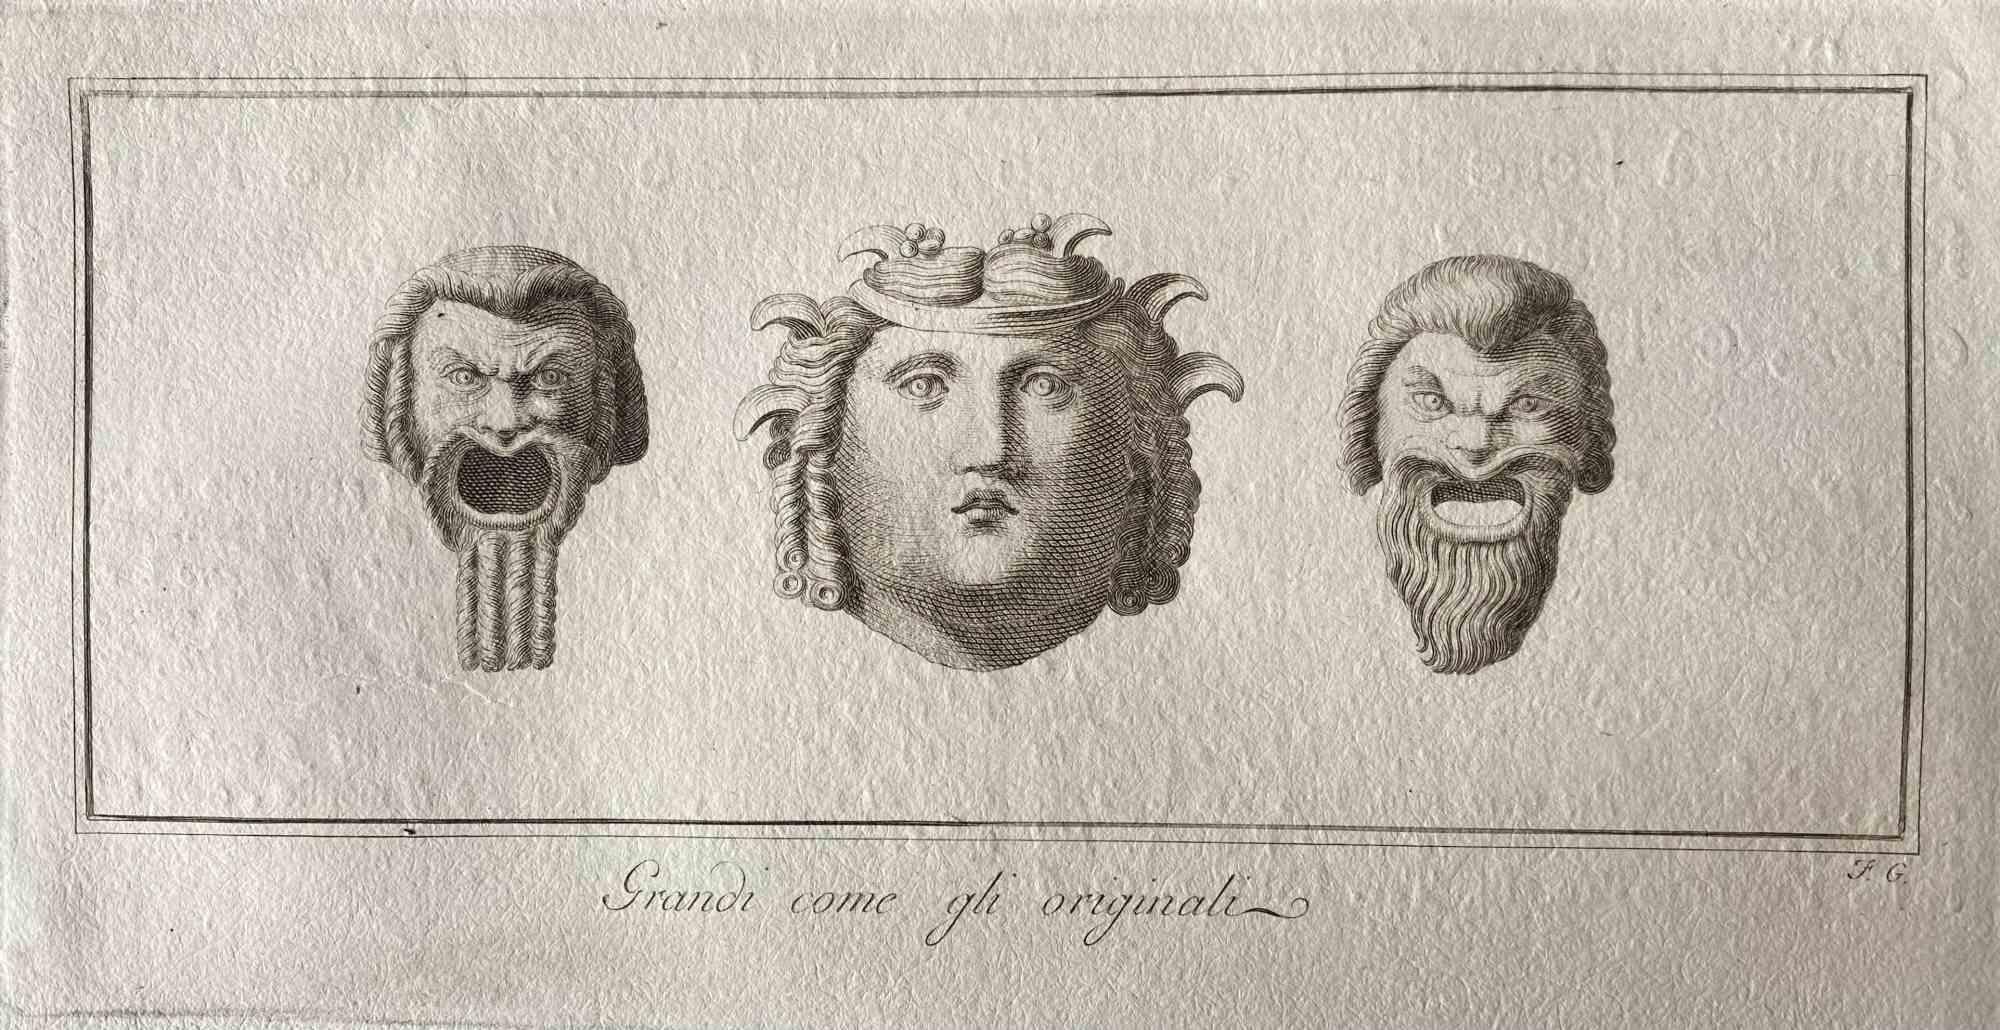 Human Heads from Ancient Rome - Original Etching by Various Masters - 1750s